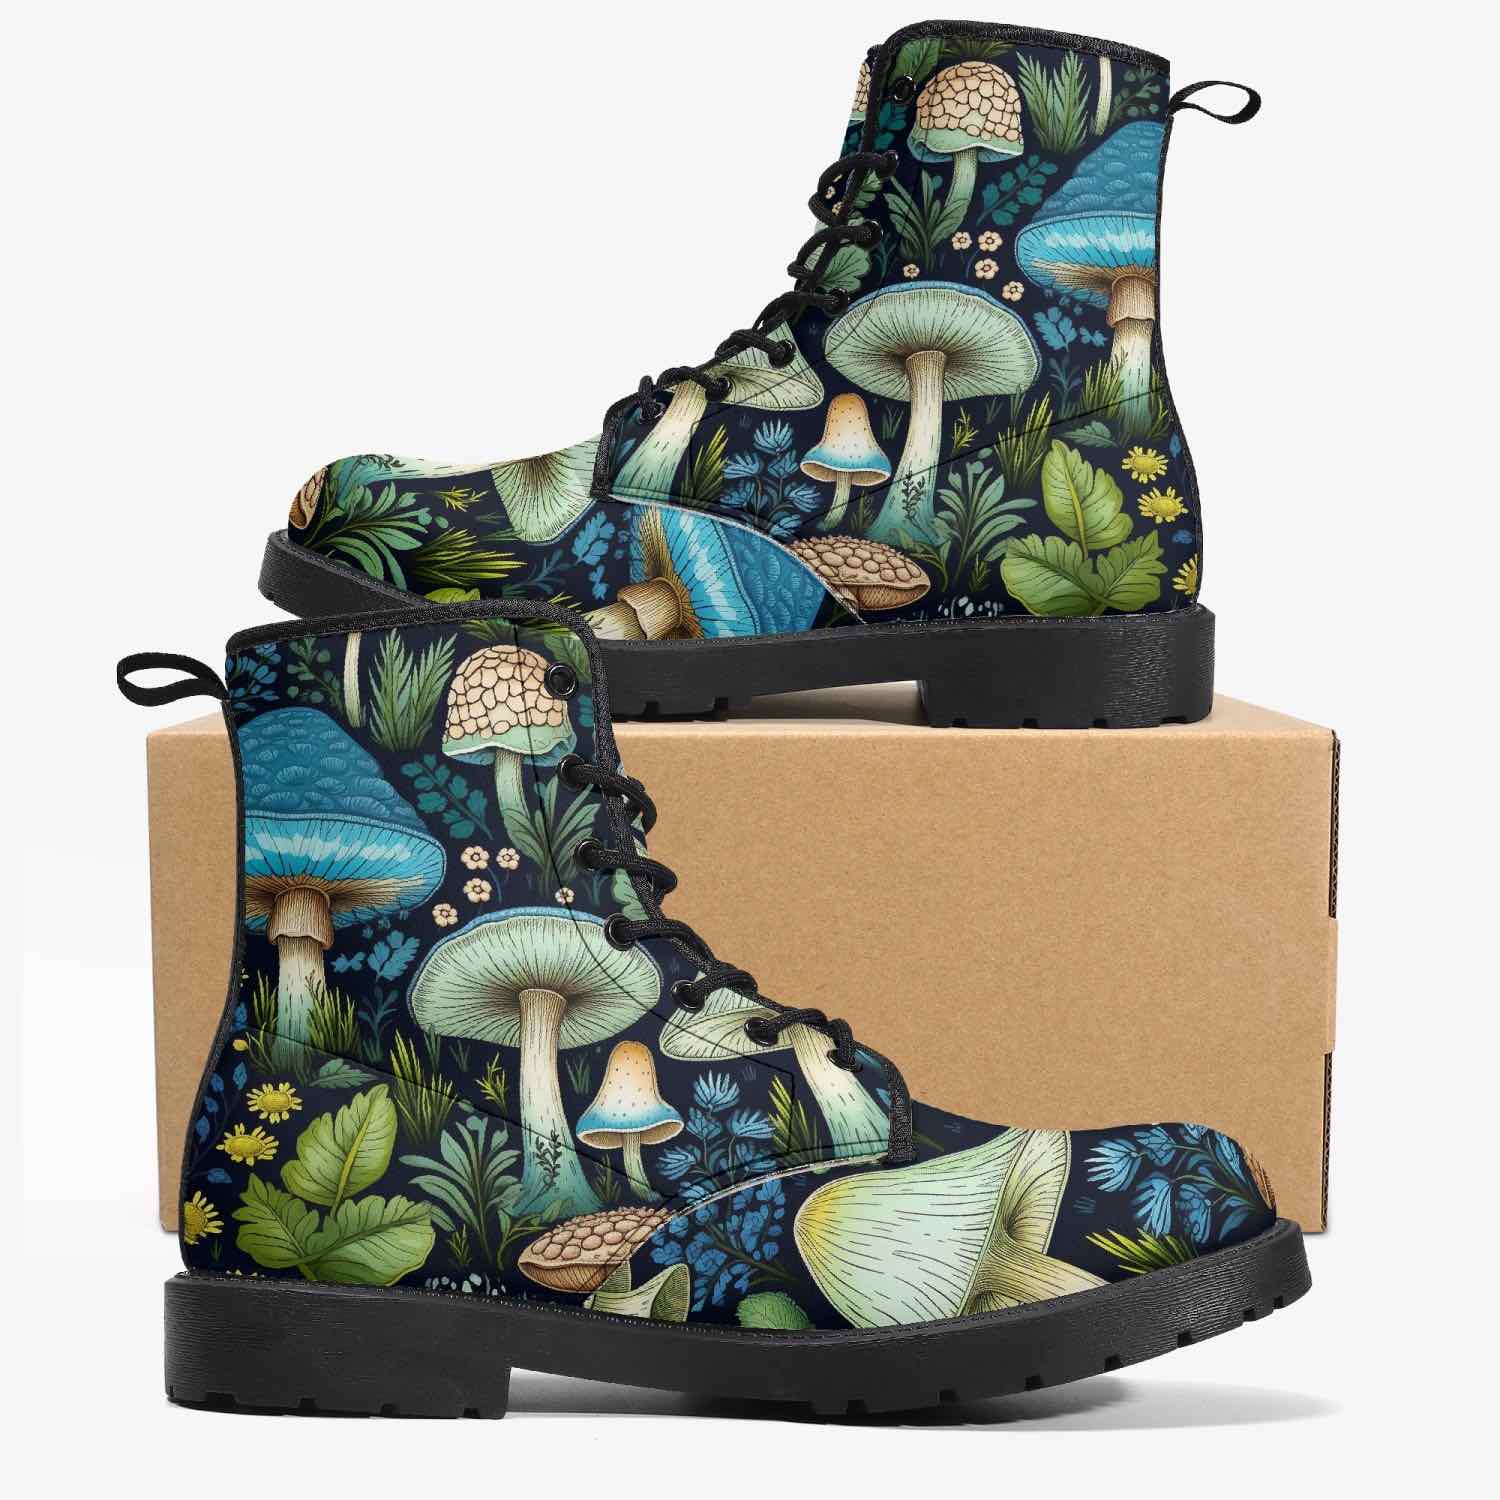 Mushroomcore toadstool forest boots in blues and greens